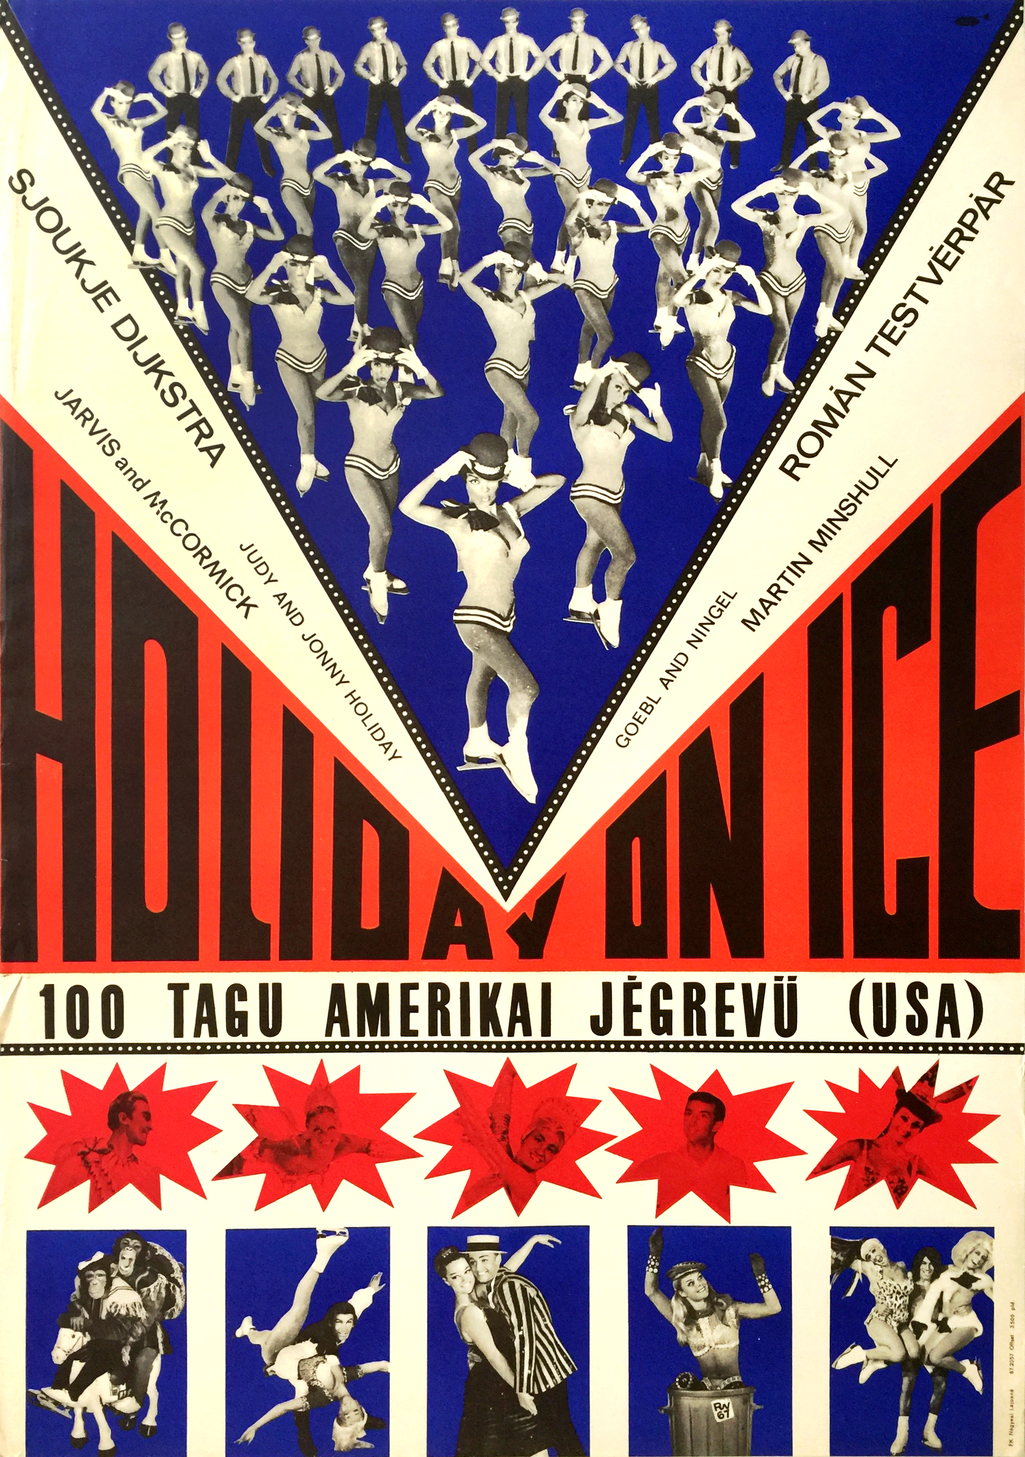 Holiday on Ice - American Ice Revue